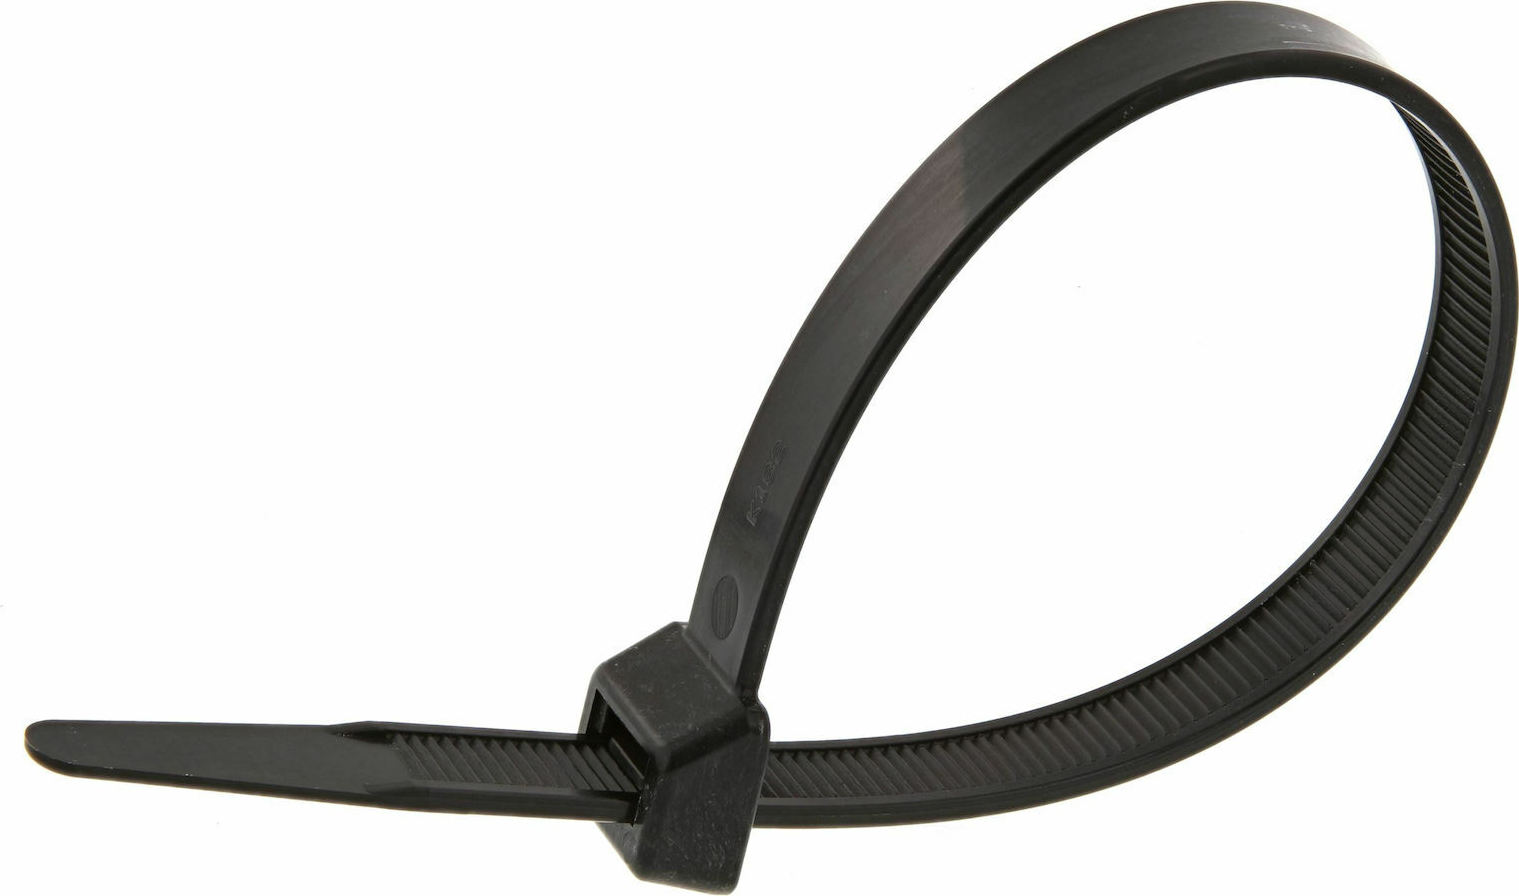 Releasable cable ties - SapiSelco - Cable Ties